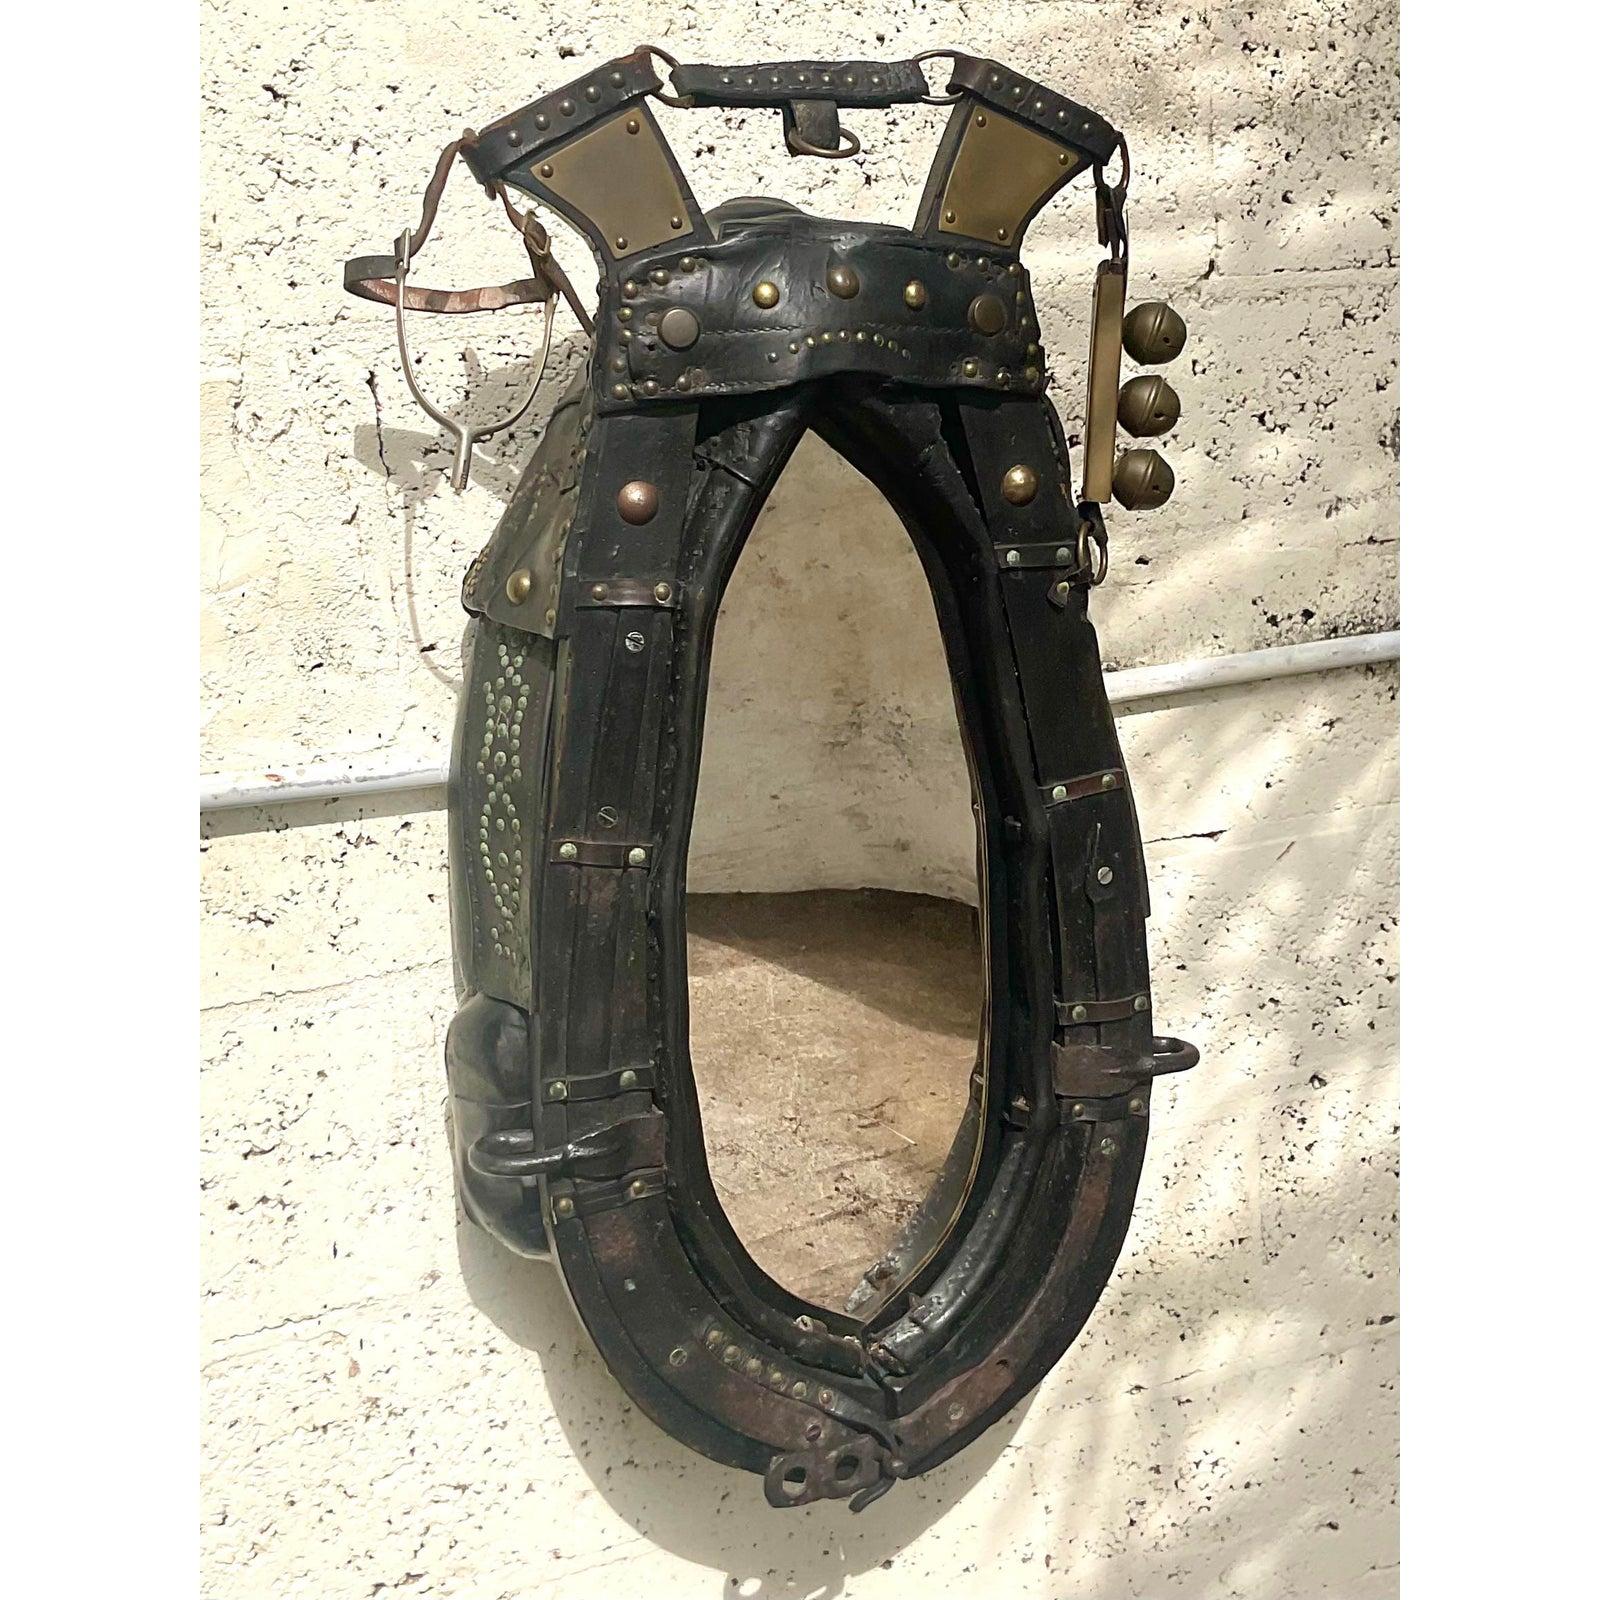 A fabulous antique horse harness that has been converted to a mirror. These are used for Sleigh horses or draft horses. Beautiful aged leather with fantastic rivet detail. Bells and stirrups add to the charm. Acquired from a Miami estate.